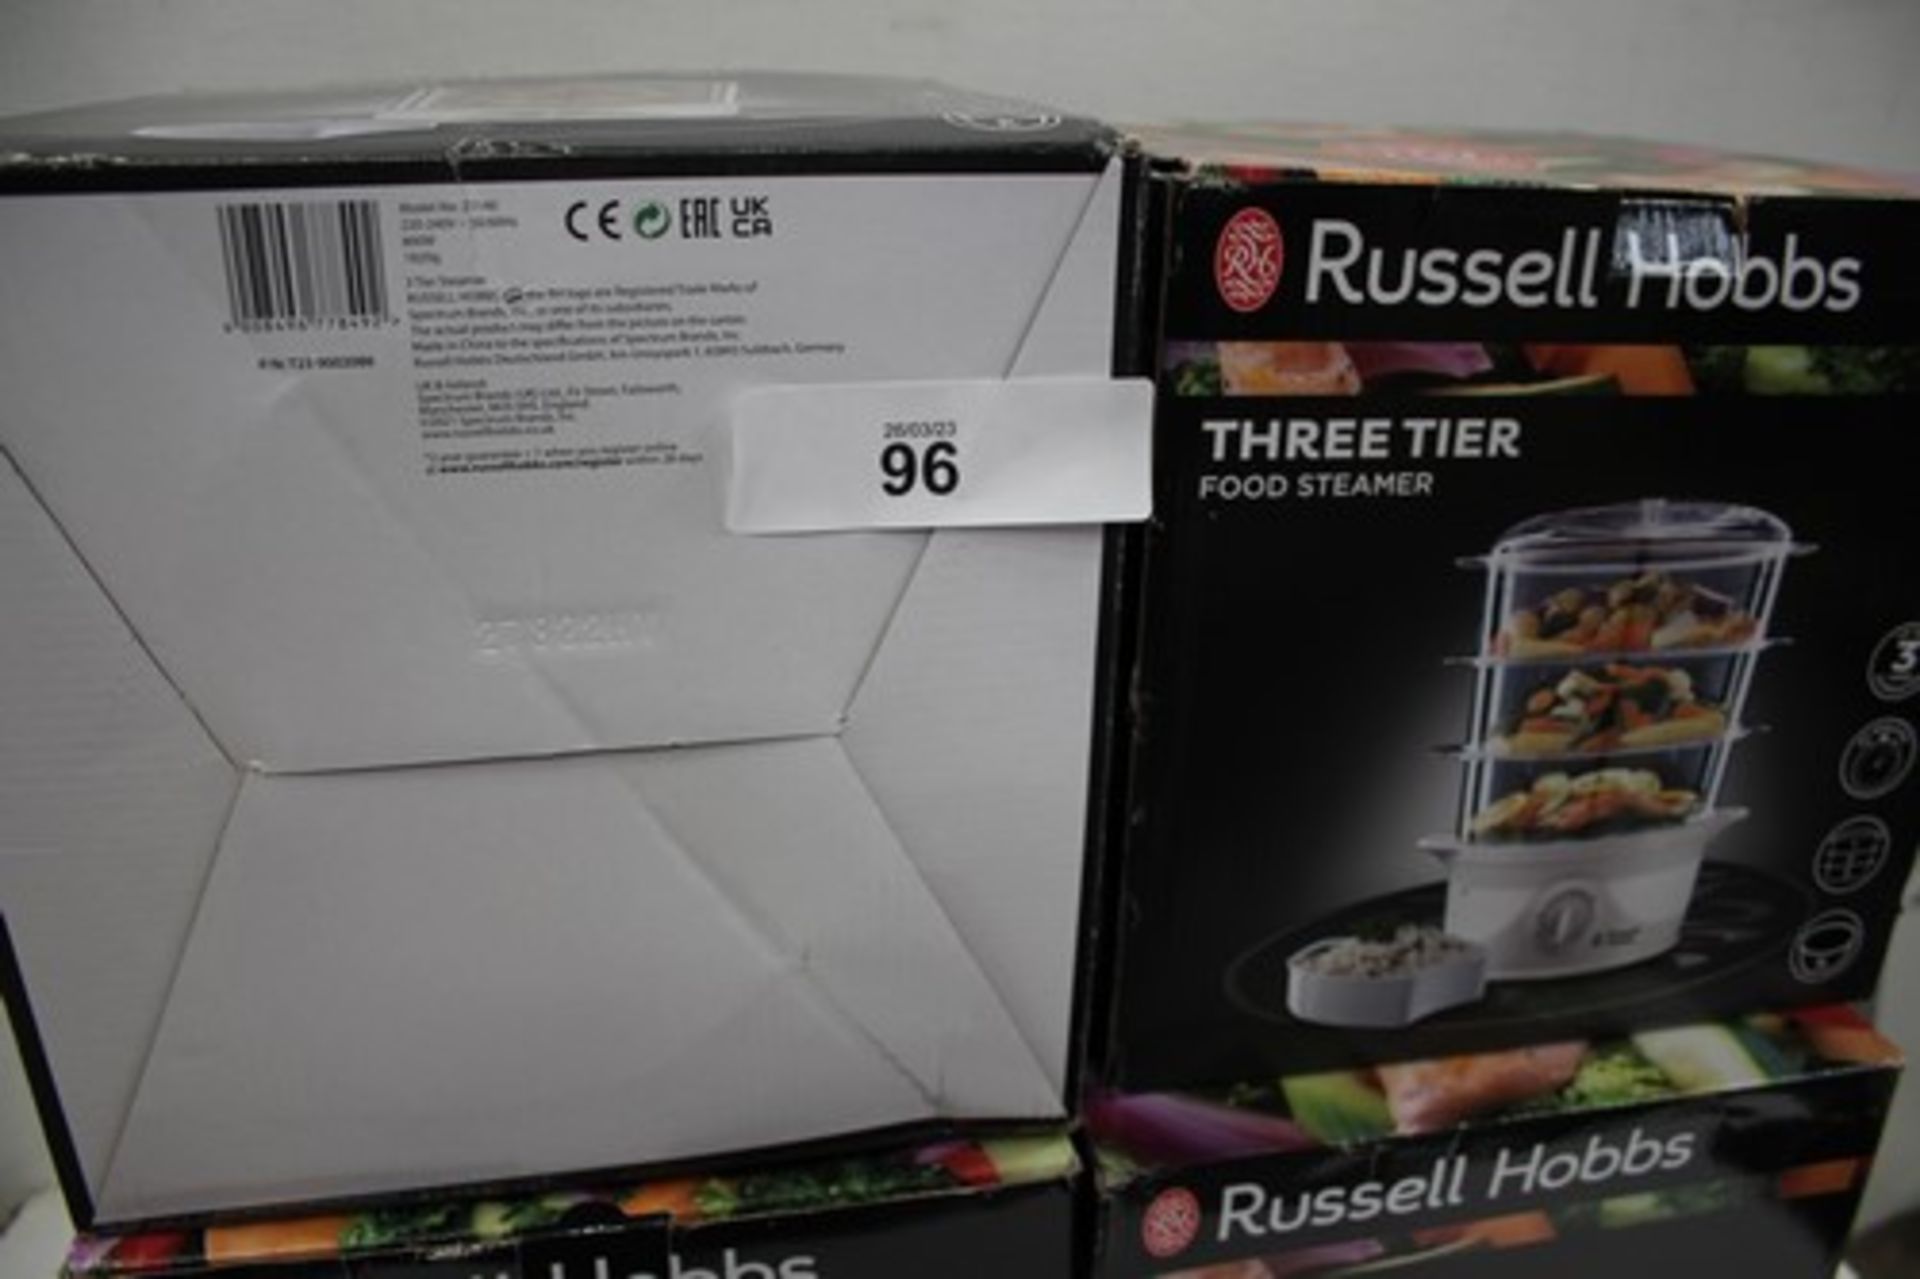 4 x Russell Hobbs 3 Tier food steamer, model no: 21140 - New in box (ES1) - Image 2 of 2